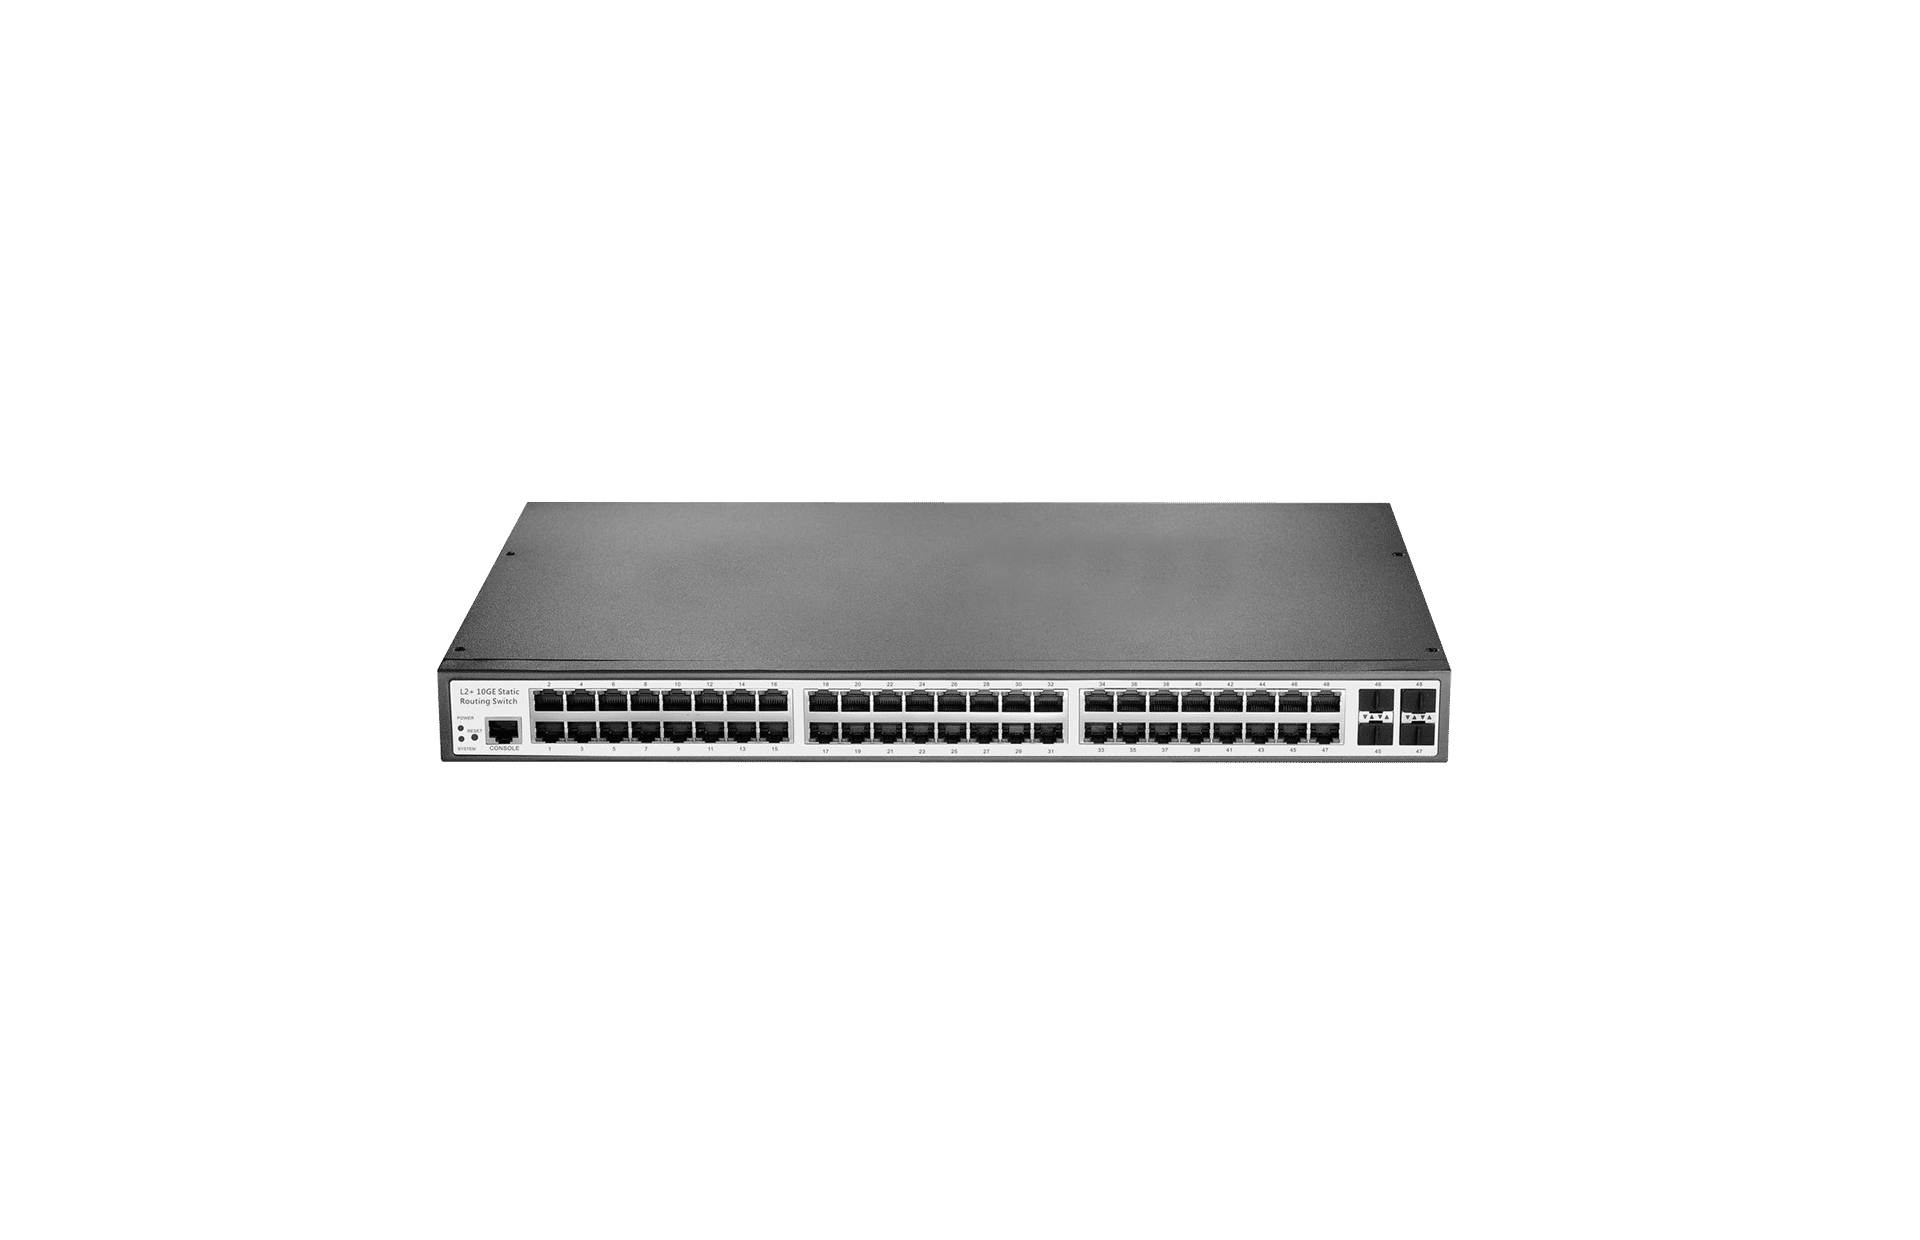 48-Port Layer 2+ 10GE Static Routing Switch with 4 Gigabit Combo 